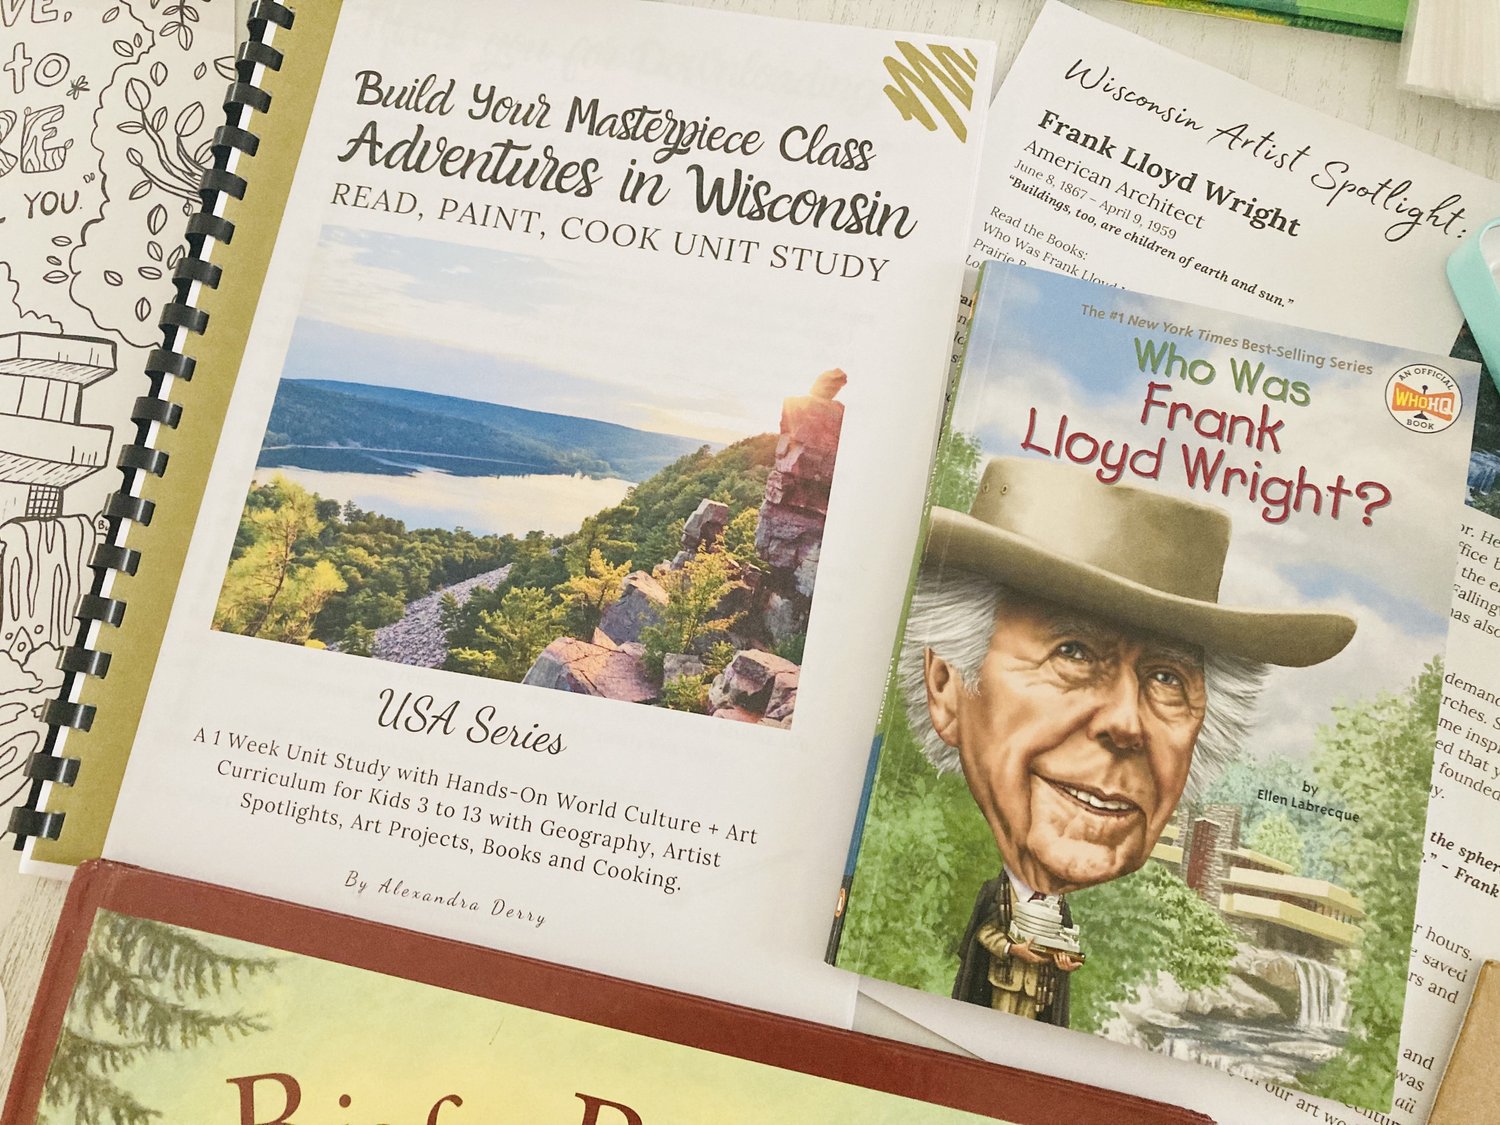 Adventures in Wisconsin & Frank Lloyd Wright Study - USA Series